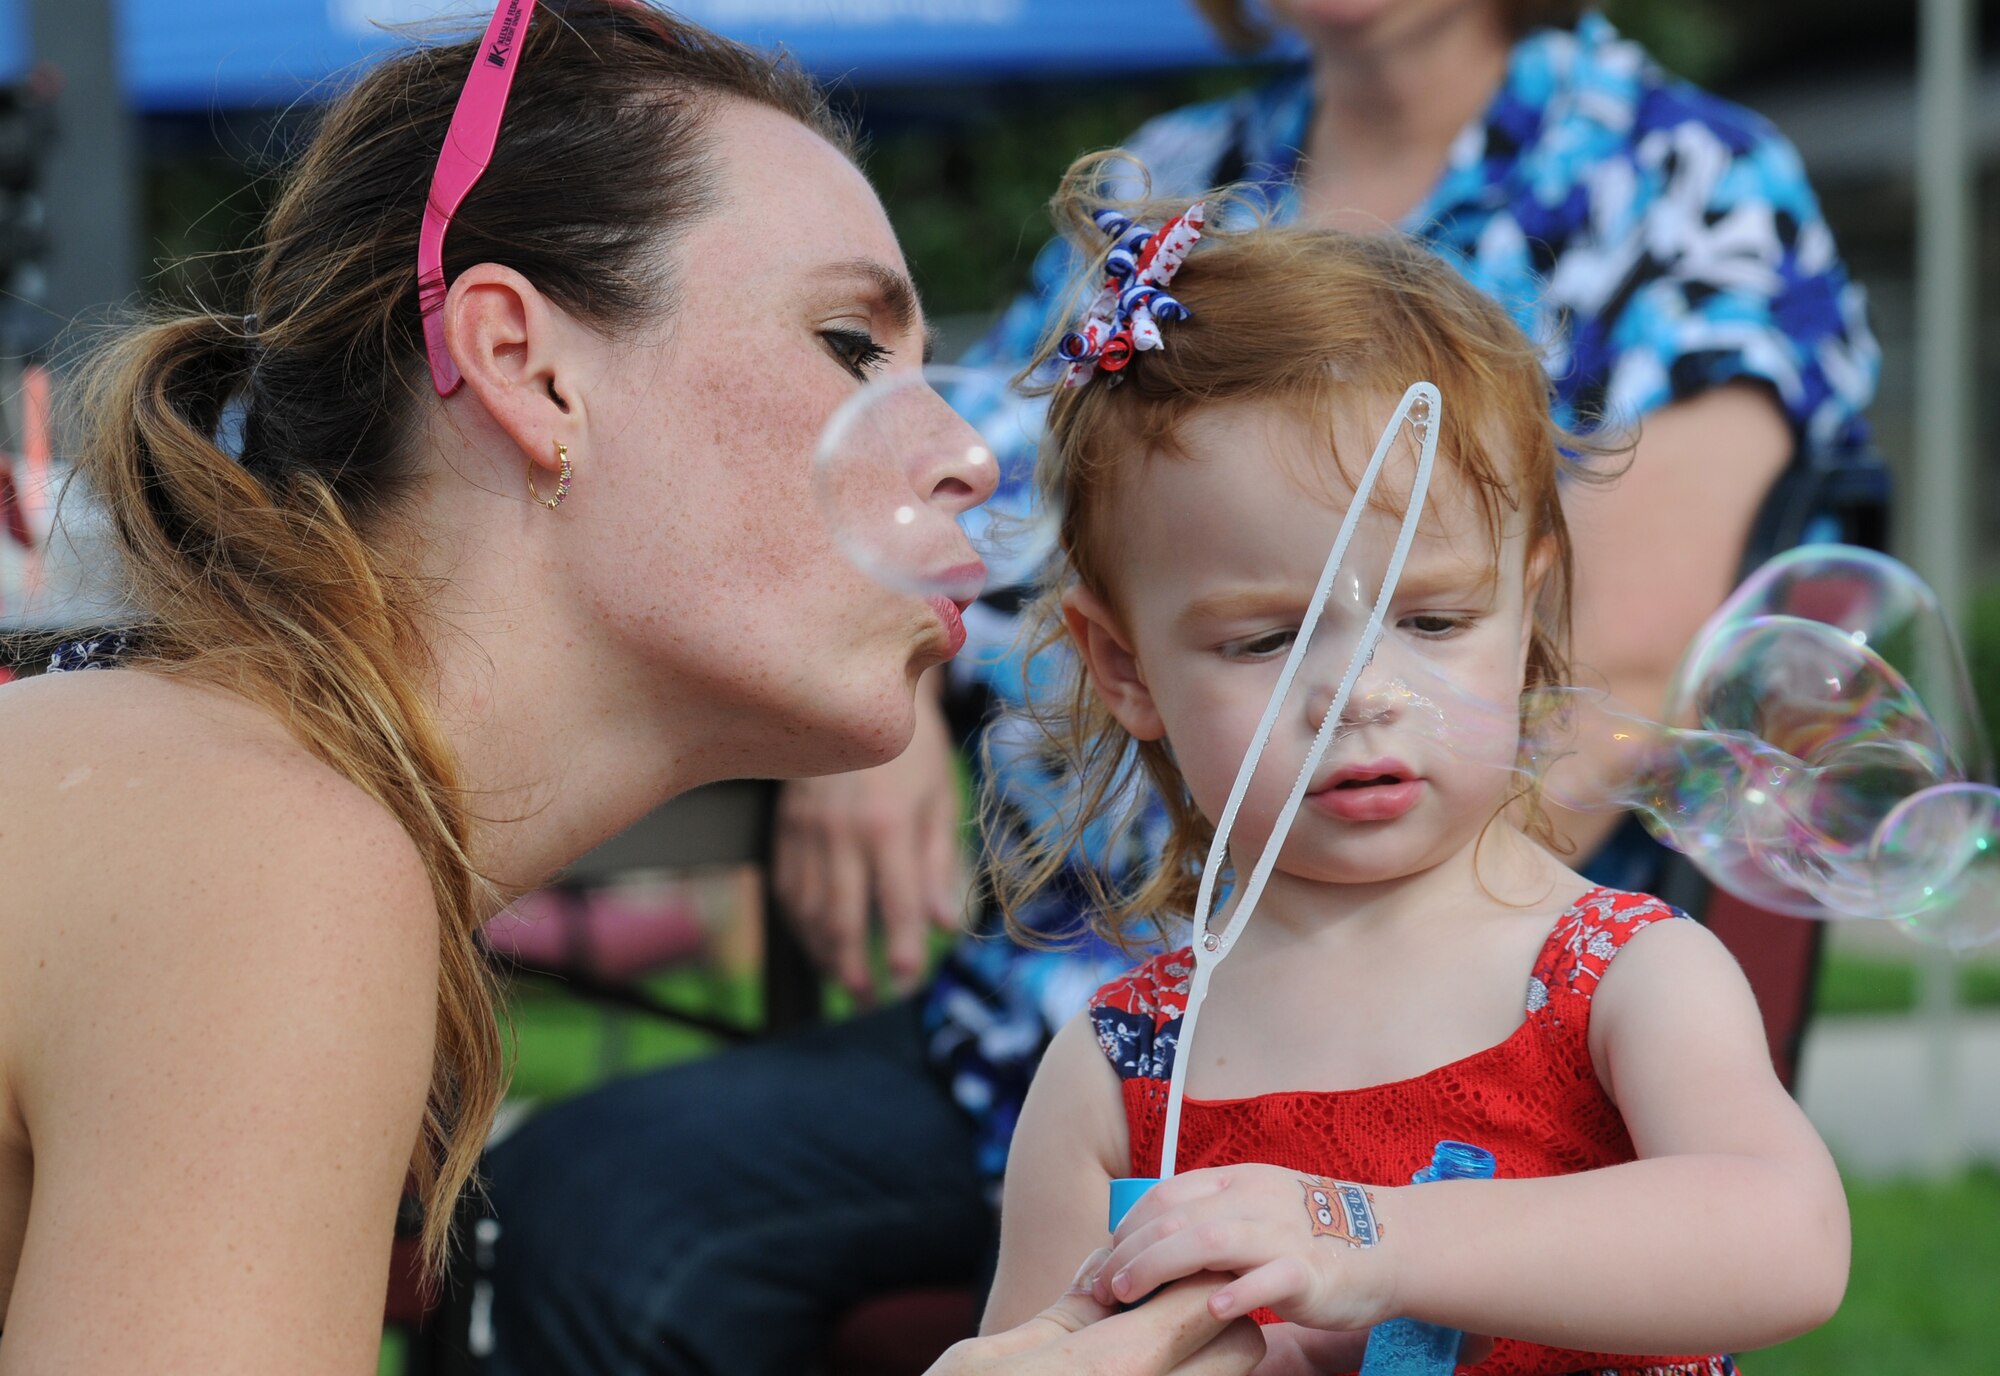 Capt. (Dr.) Lynsey Cox, 81st Surgical Operations Squadron OBGYN, blows bubbles with her daughter, Lucy, during Keesler’s Air Force birthday celebration in front of Vandenberg Hall Sept. 16, 2016, on Keesler Air Force Base, Miss. The event included a cake-cutting ceremony, music and food to celebrate the Air Force’s 69th birthday. (U.S. Air Force photo by Kemberly Groue/Released)